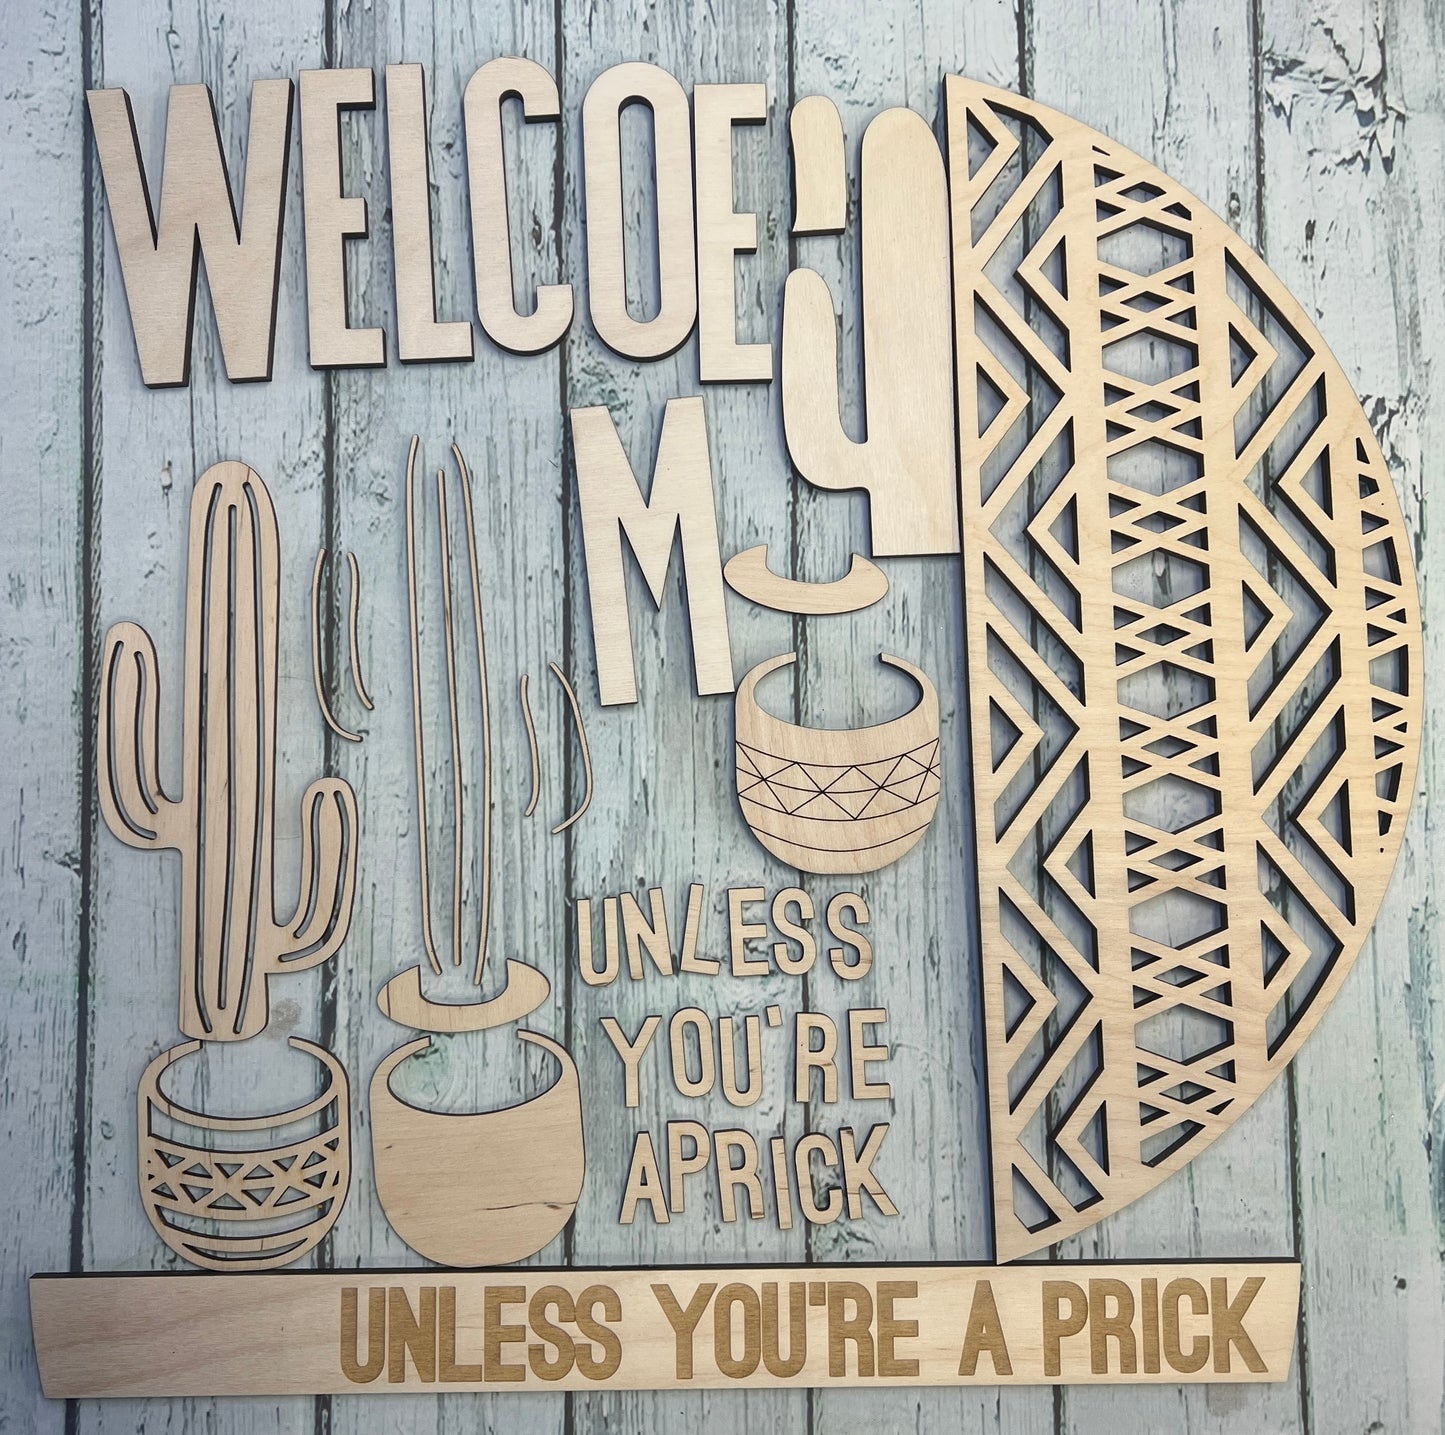 Welcome - Unless you’re a prick